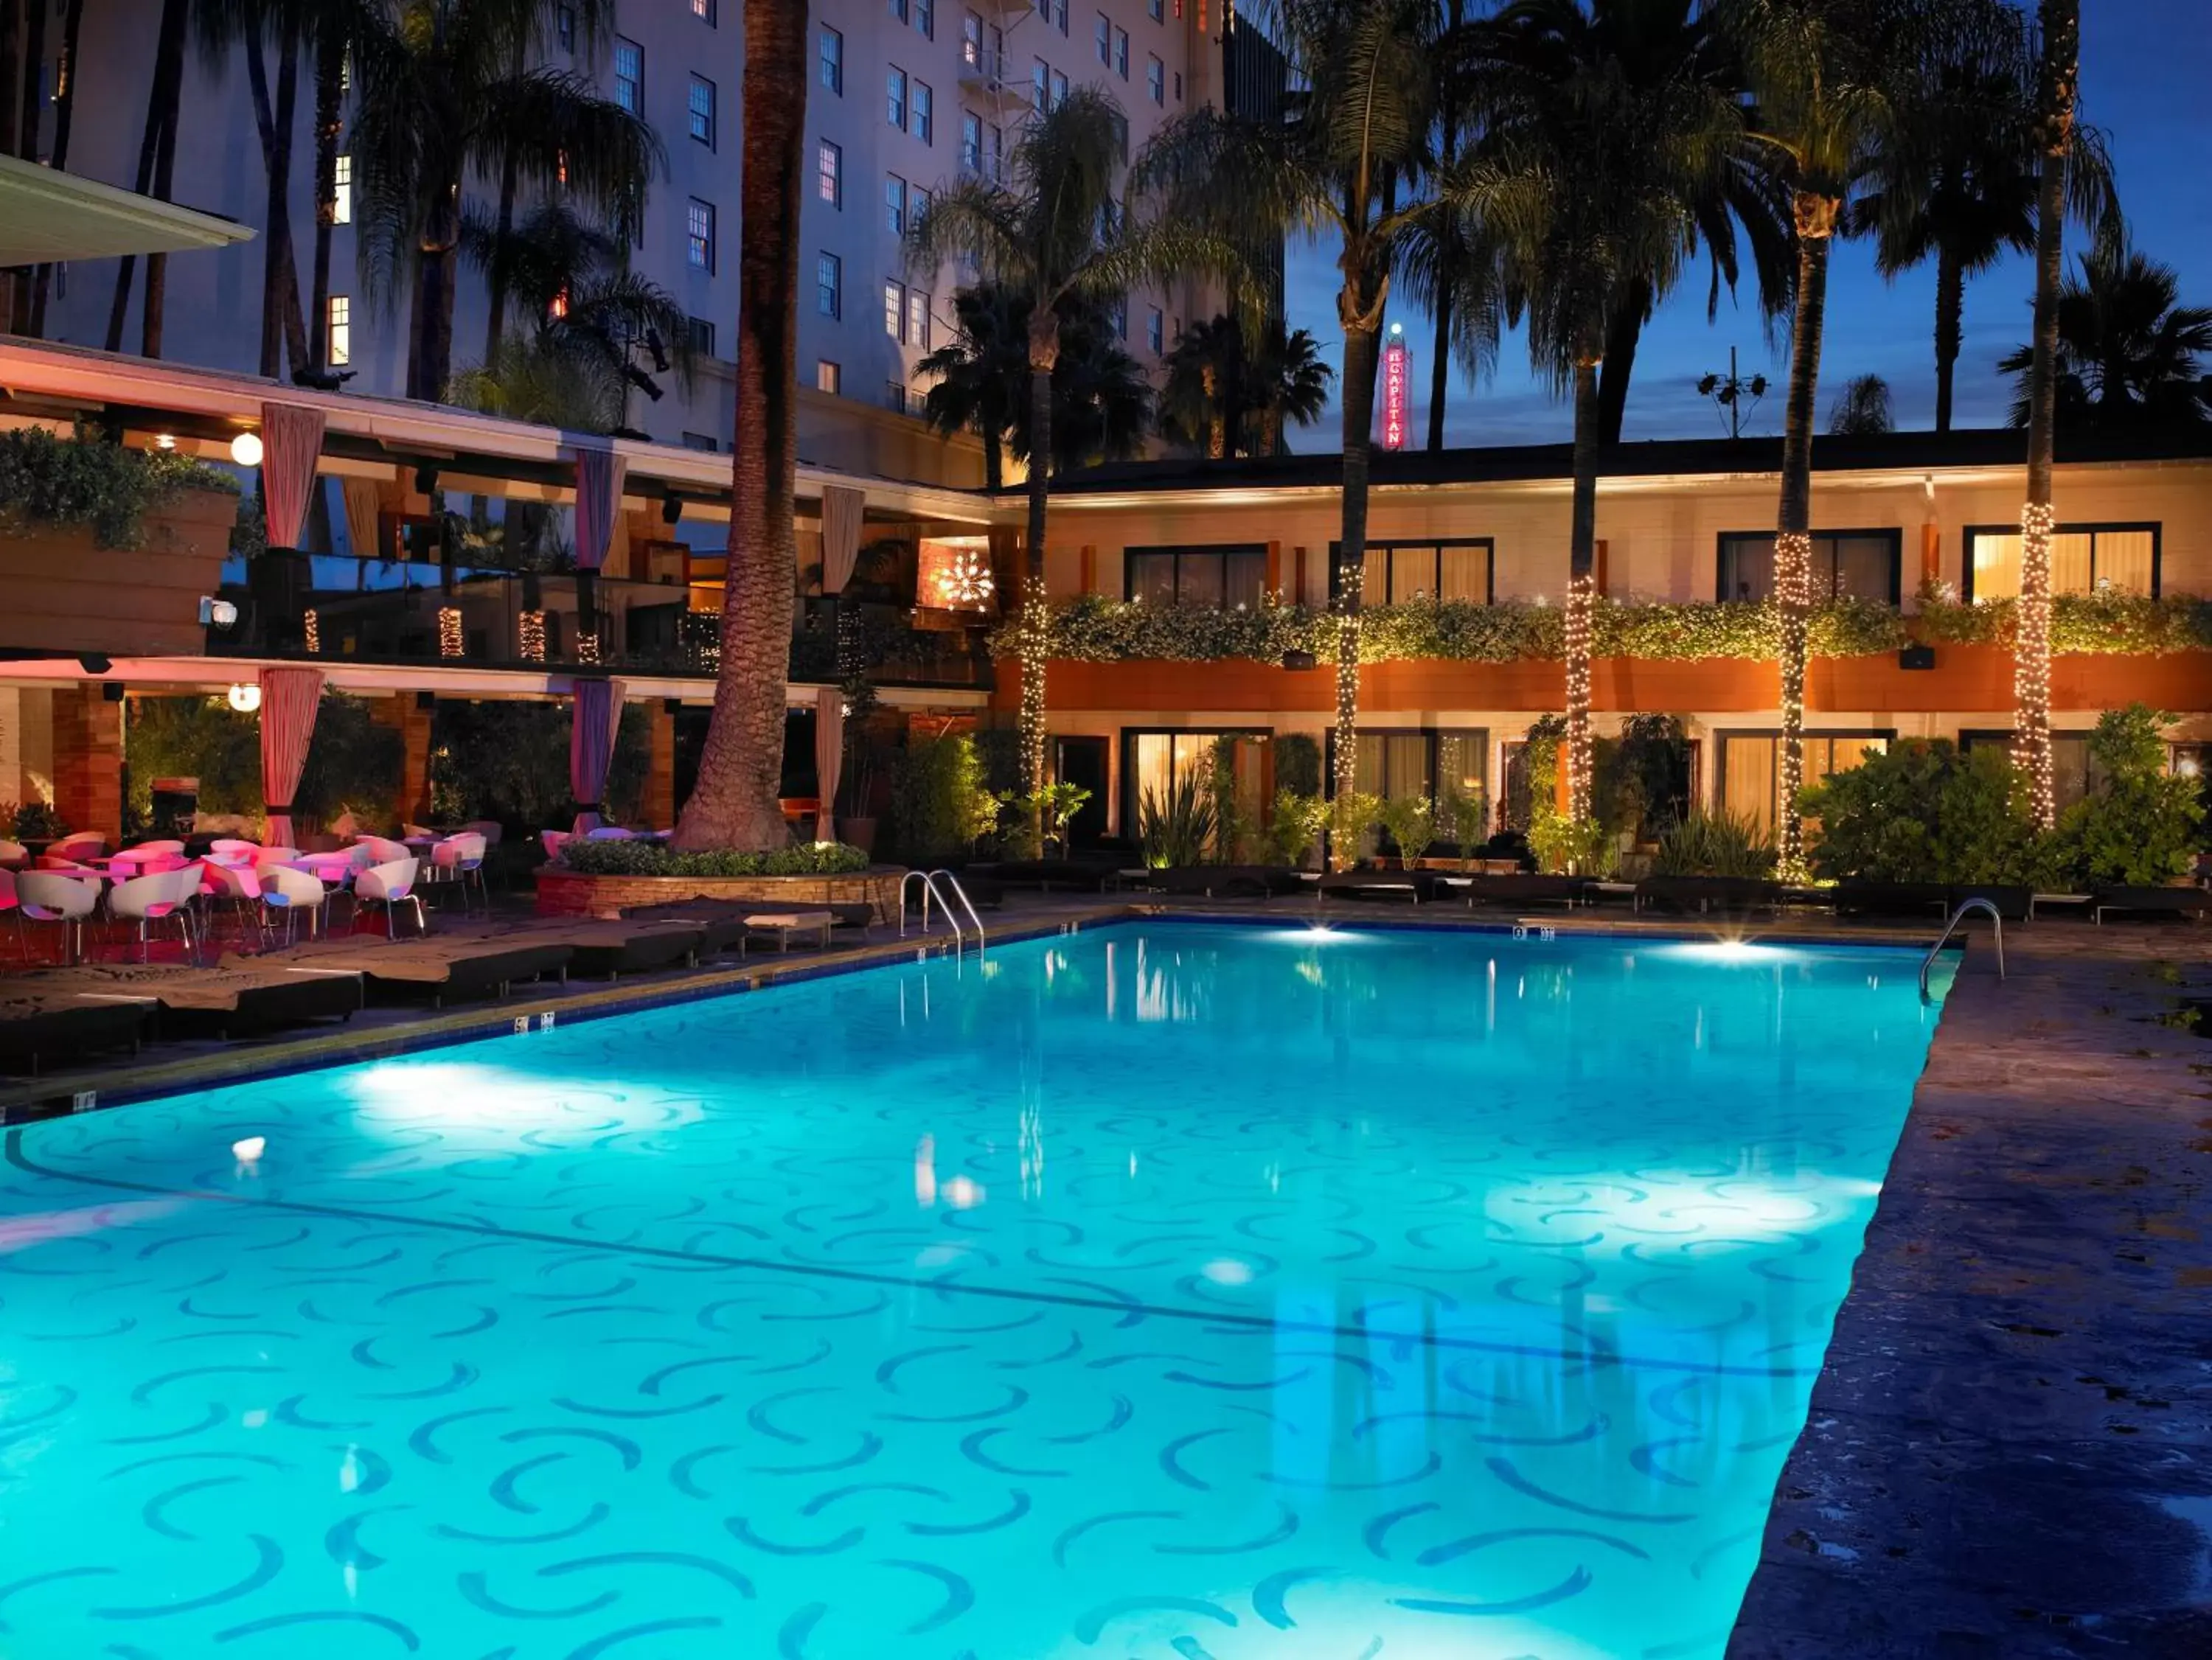 Swimming Pool in The Hollywood Roosevelt